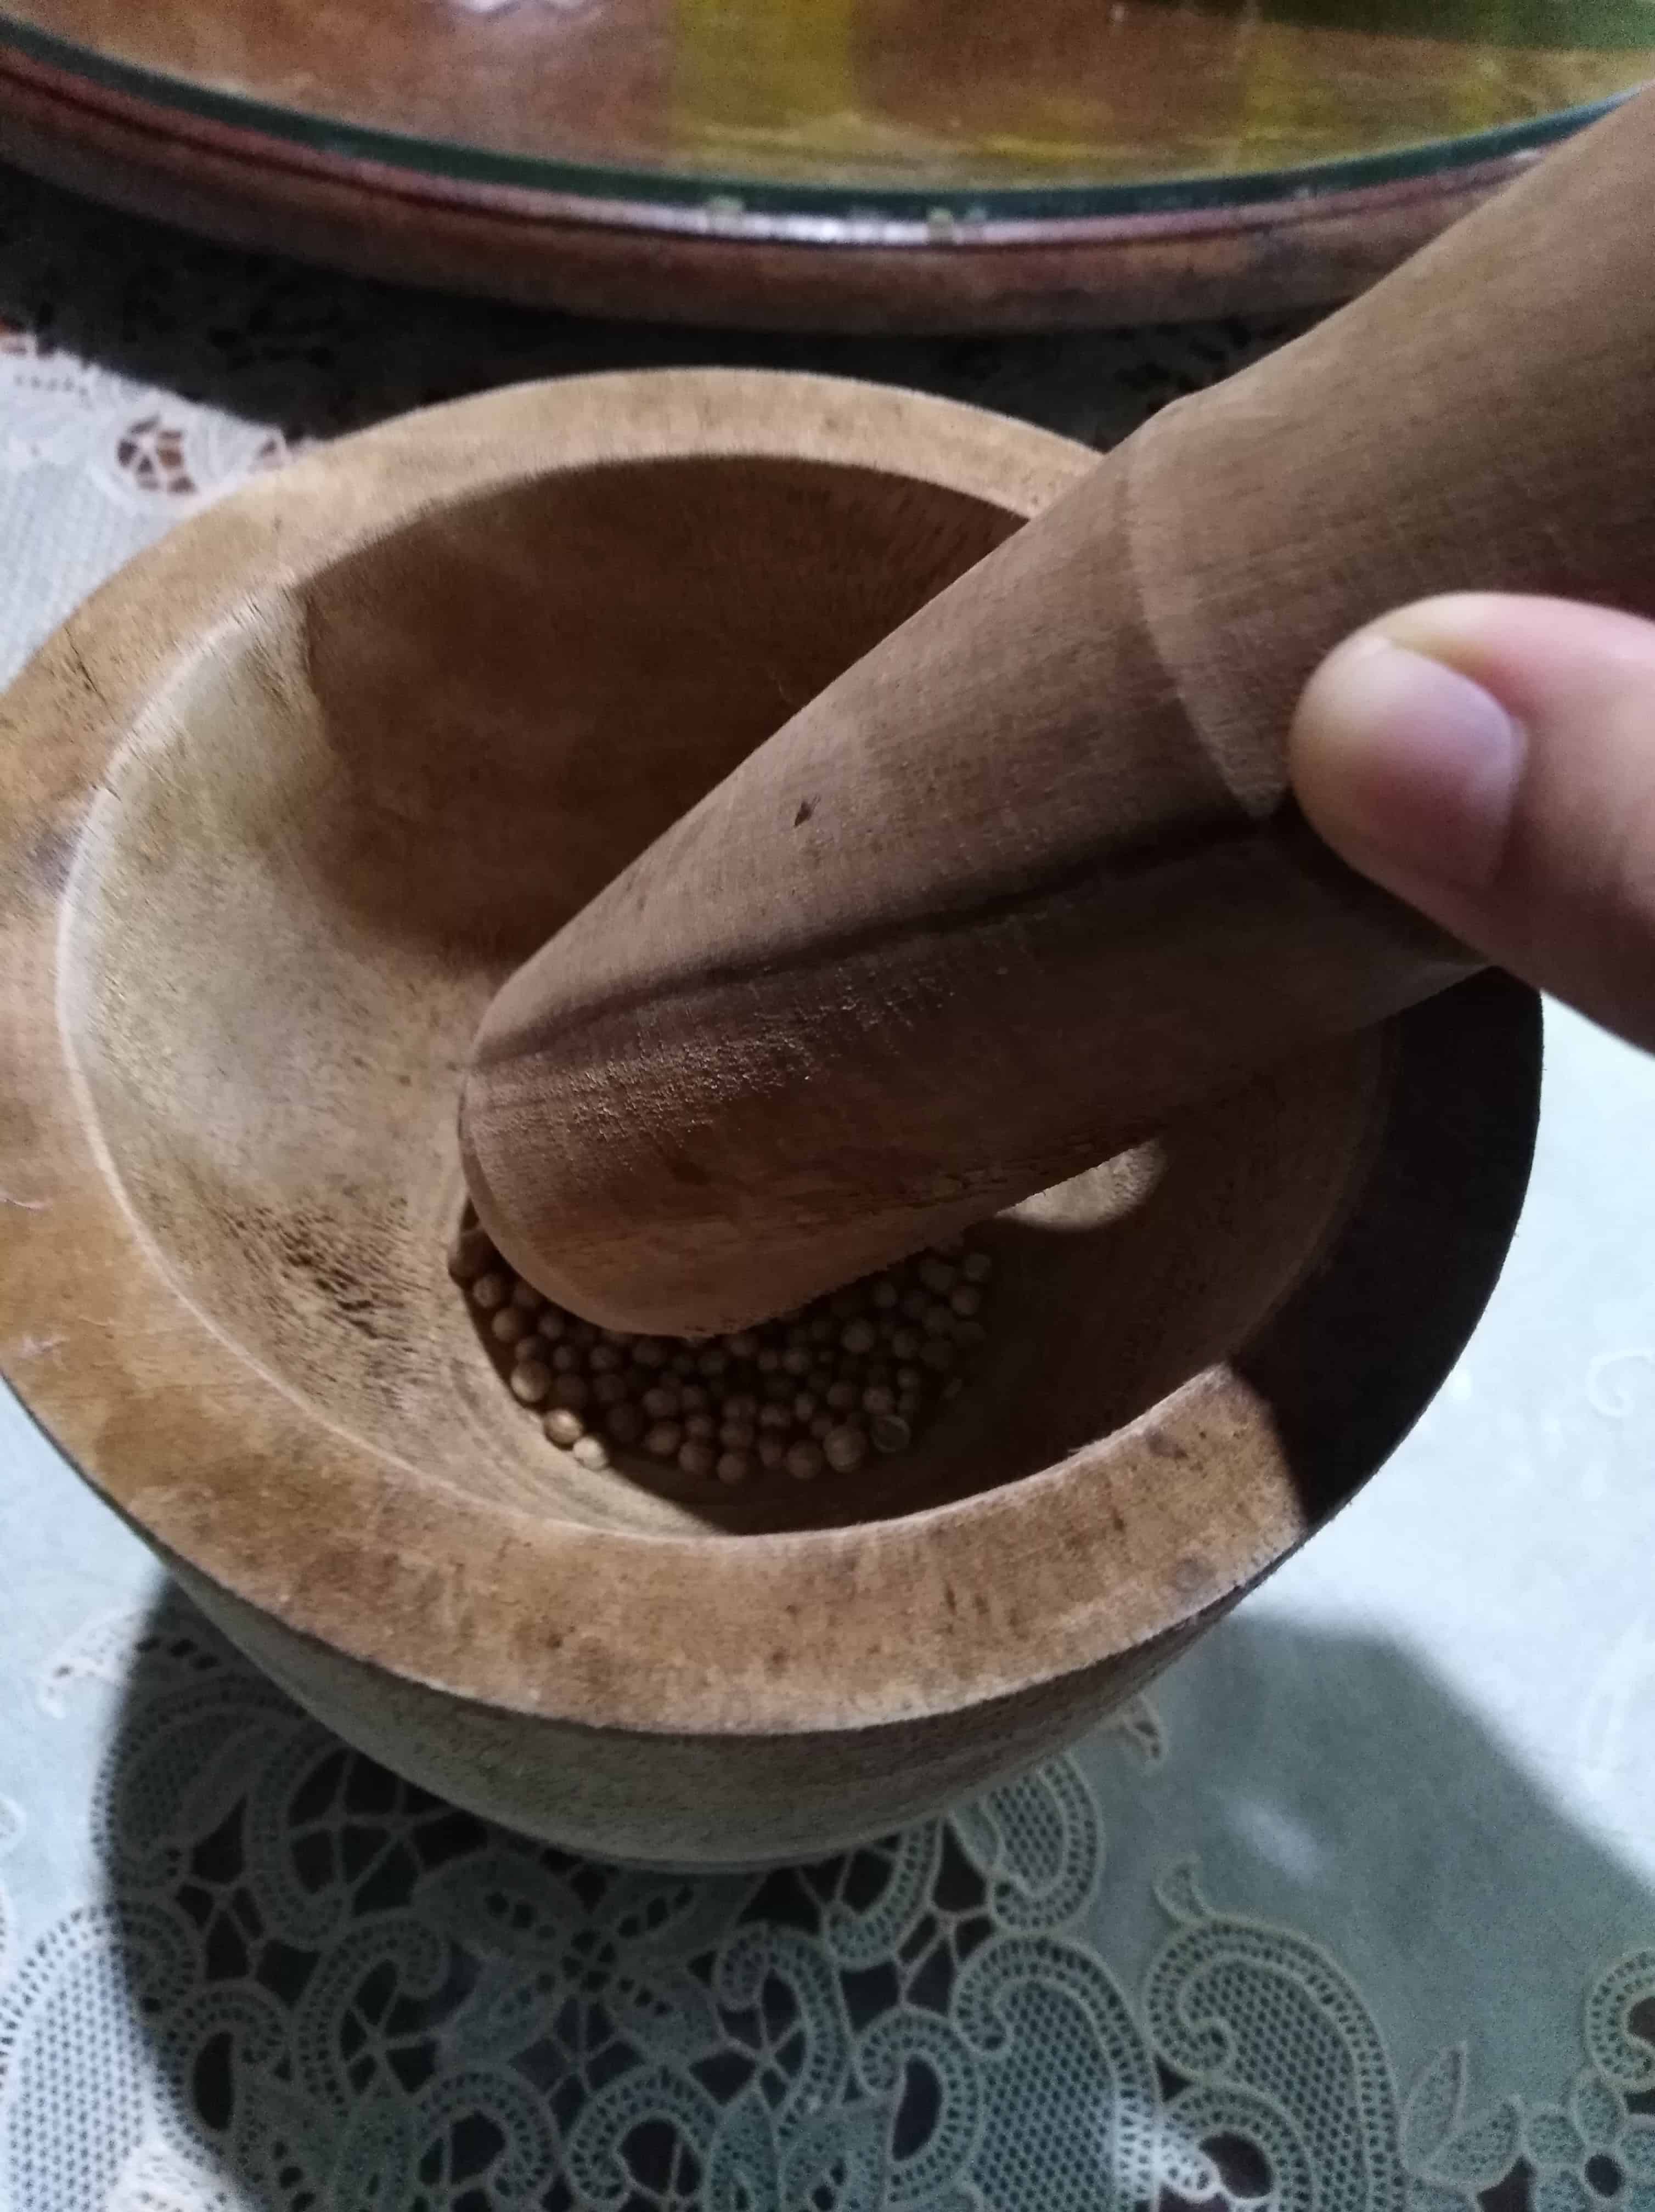 Crushing whole coriander seeds in a mortar with a pestle